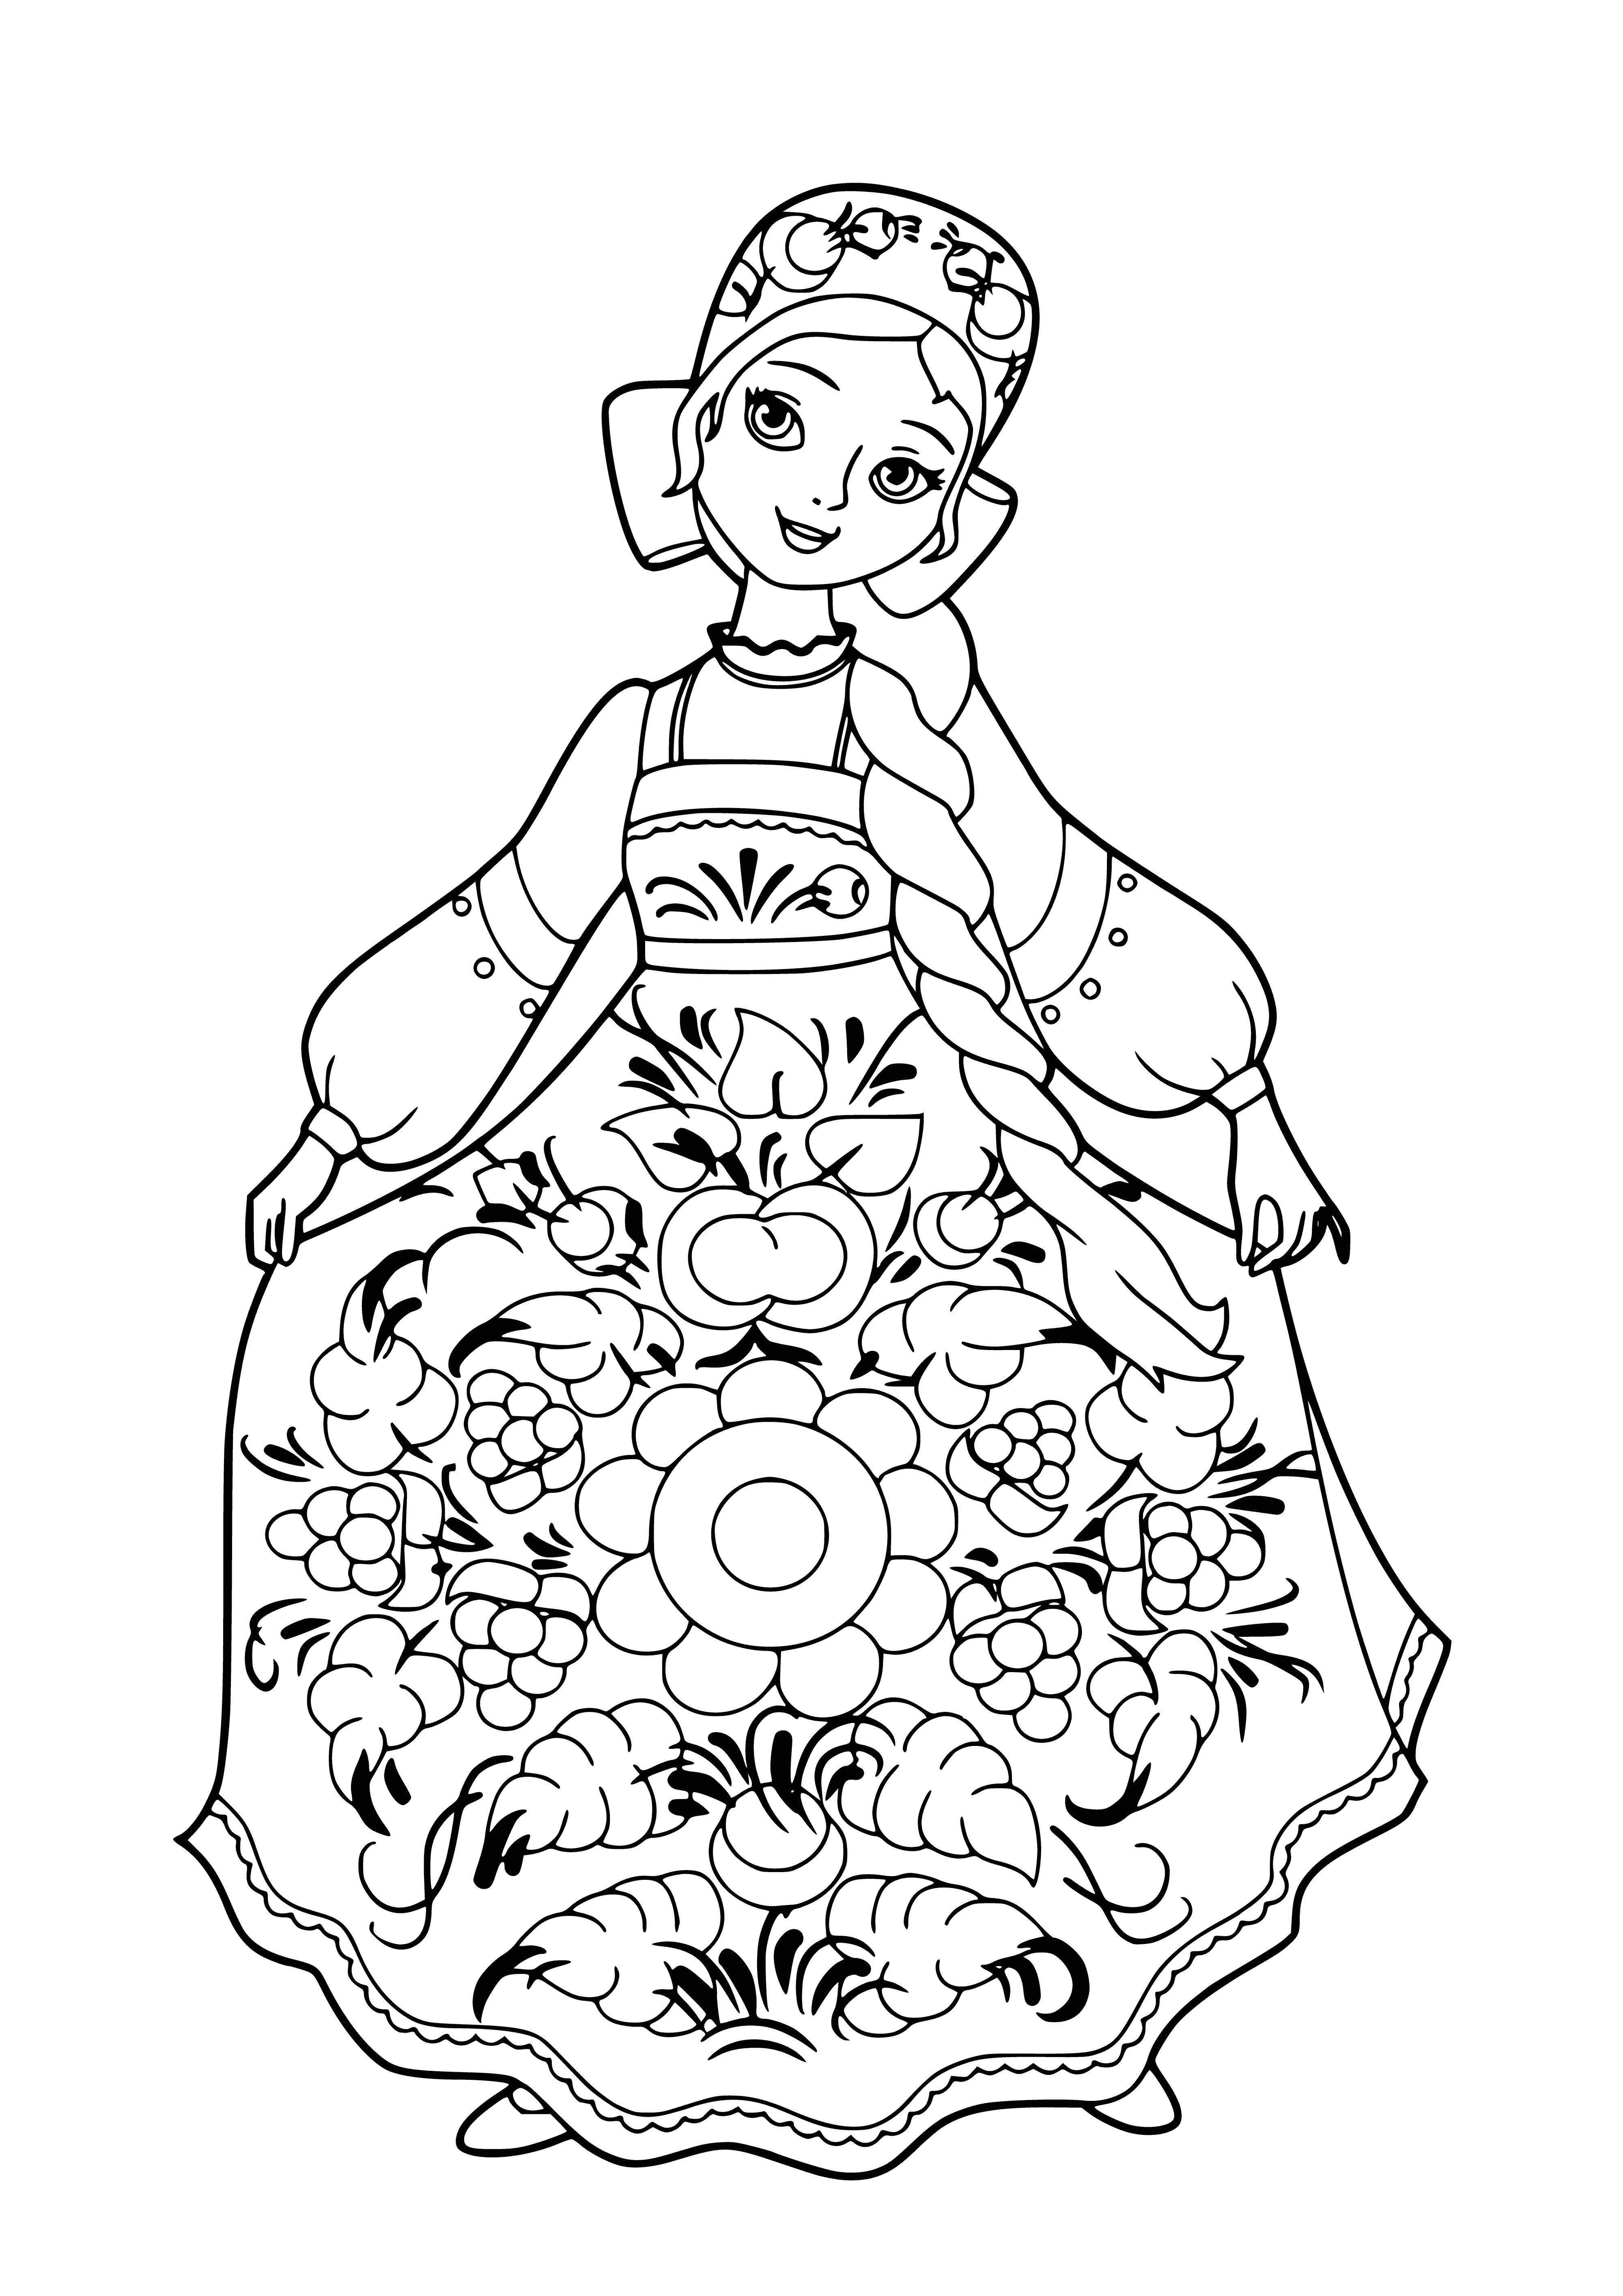 coloring page: Woman stands in the wintery scene, wearing a light dress and scarf, smiling warmly to the side.